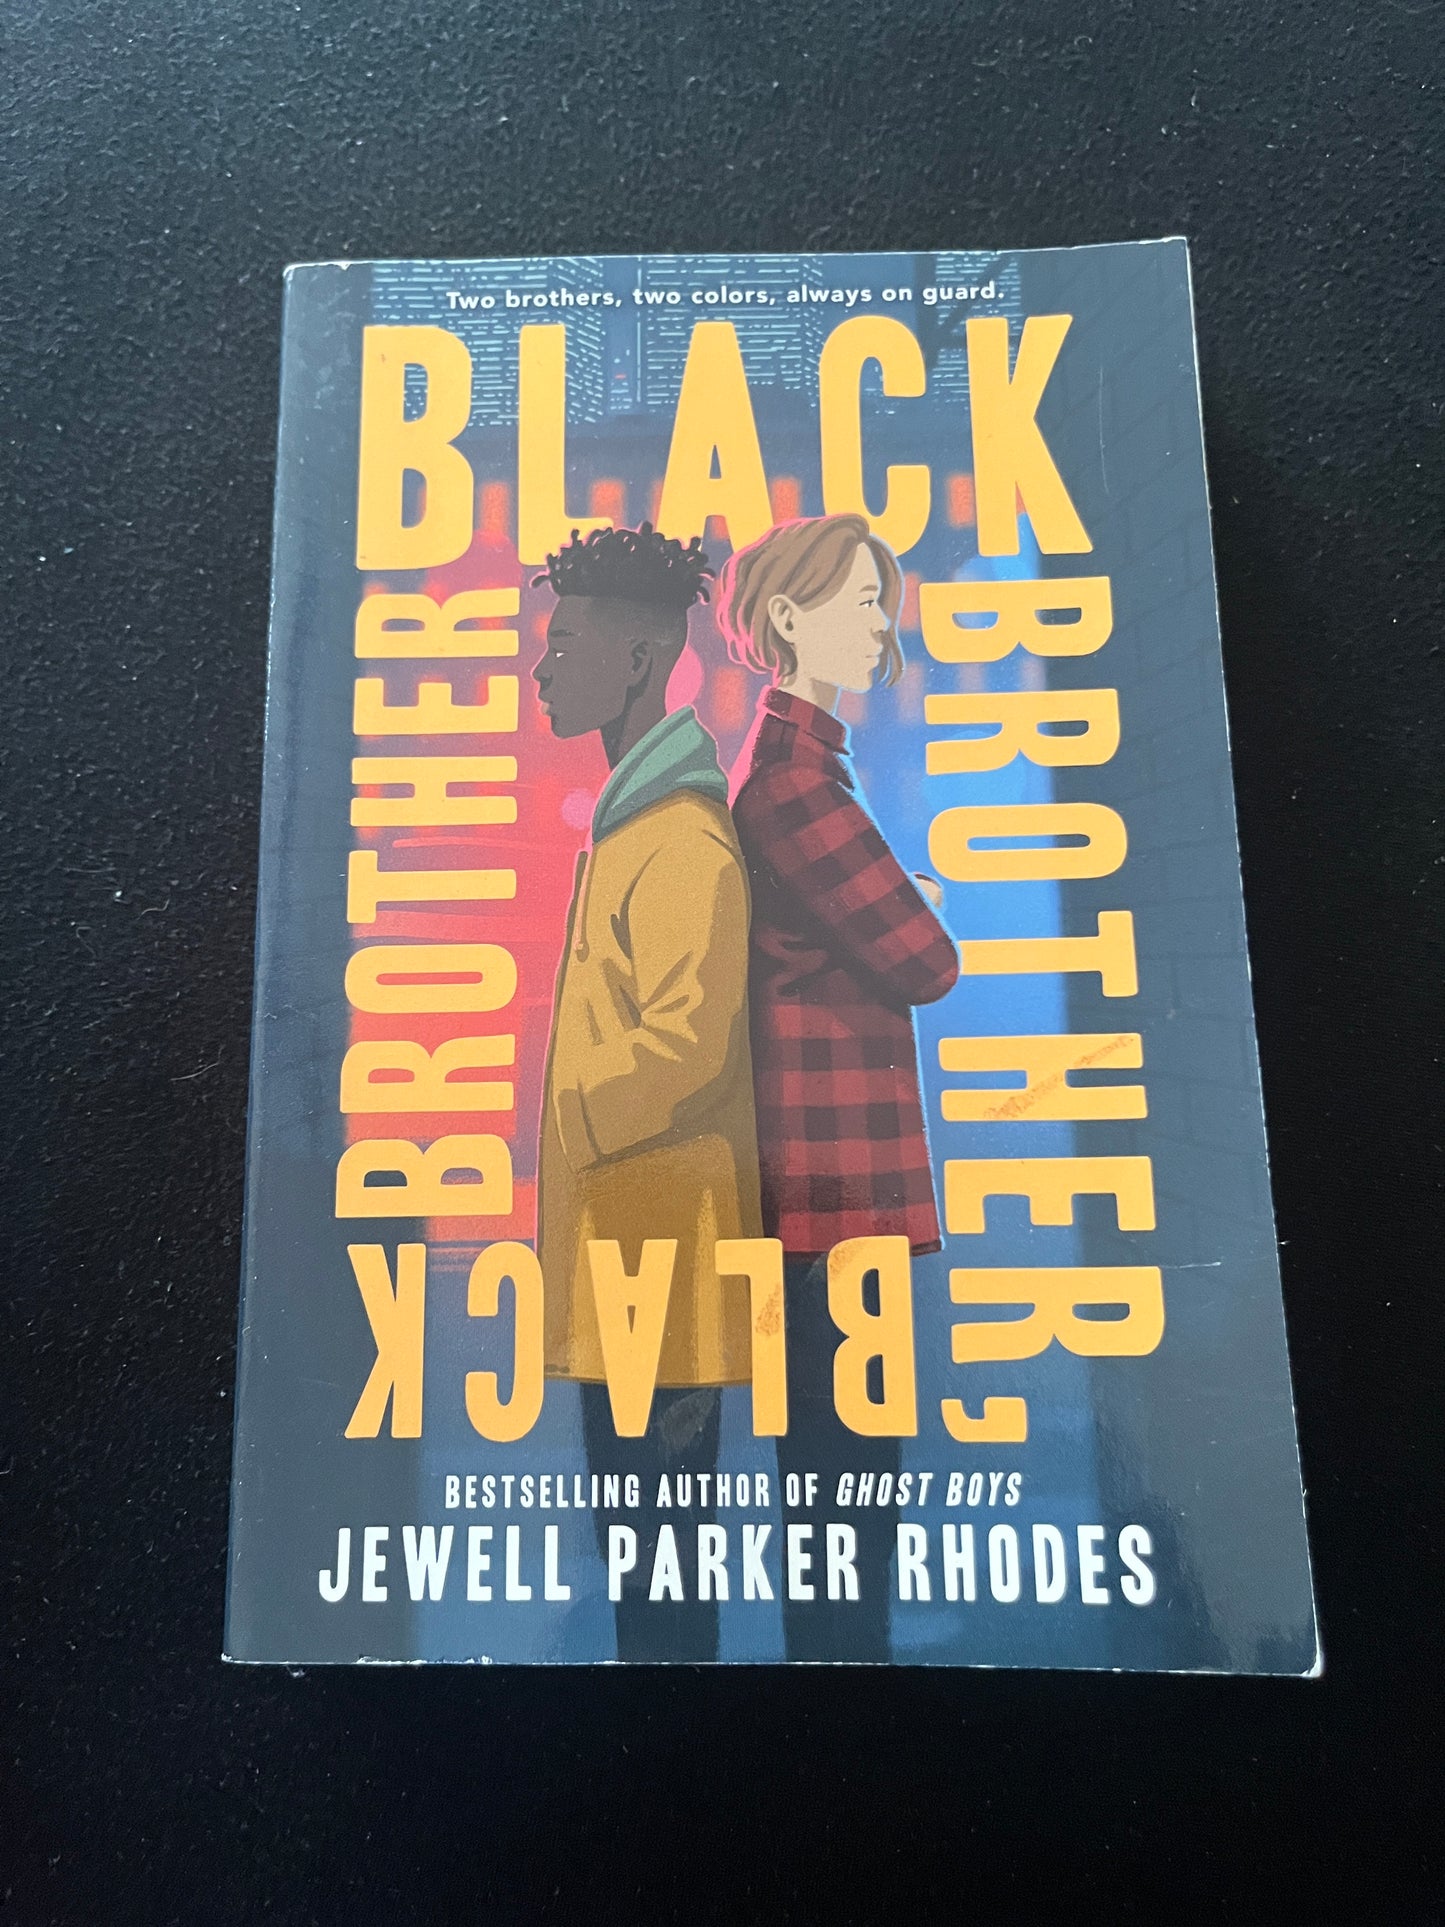 BLACK BROTHER, BLACK BROTHER by Jewell Parker Rhodes